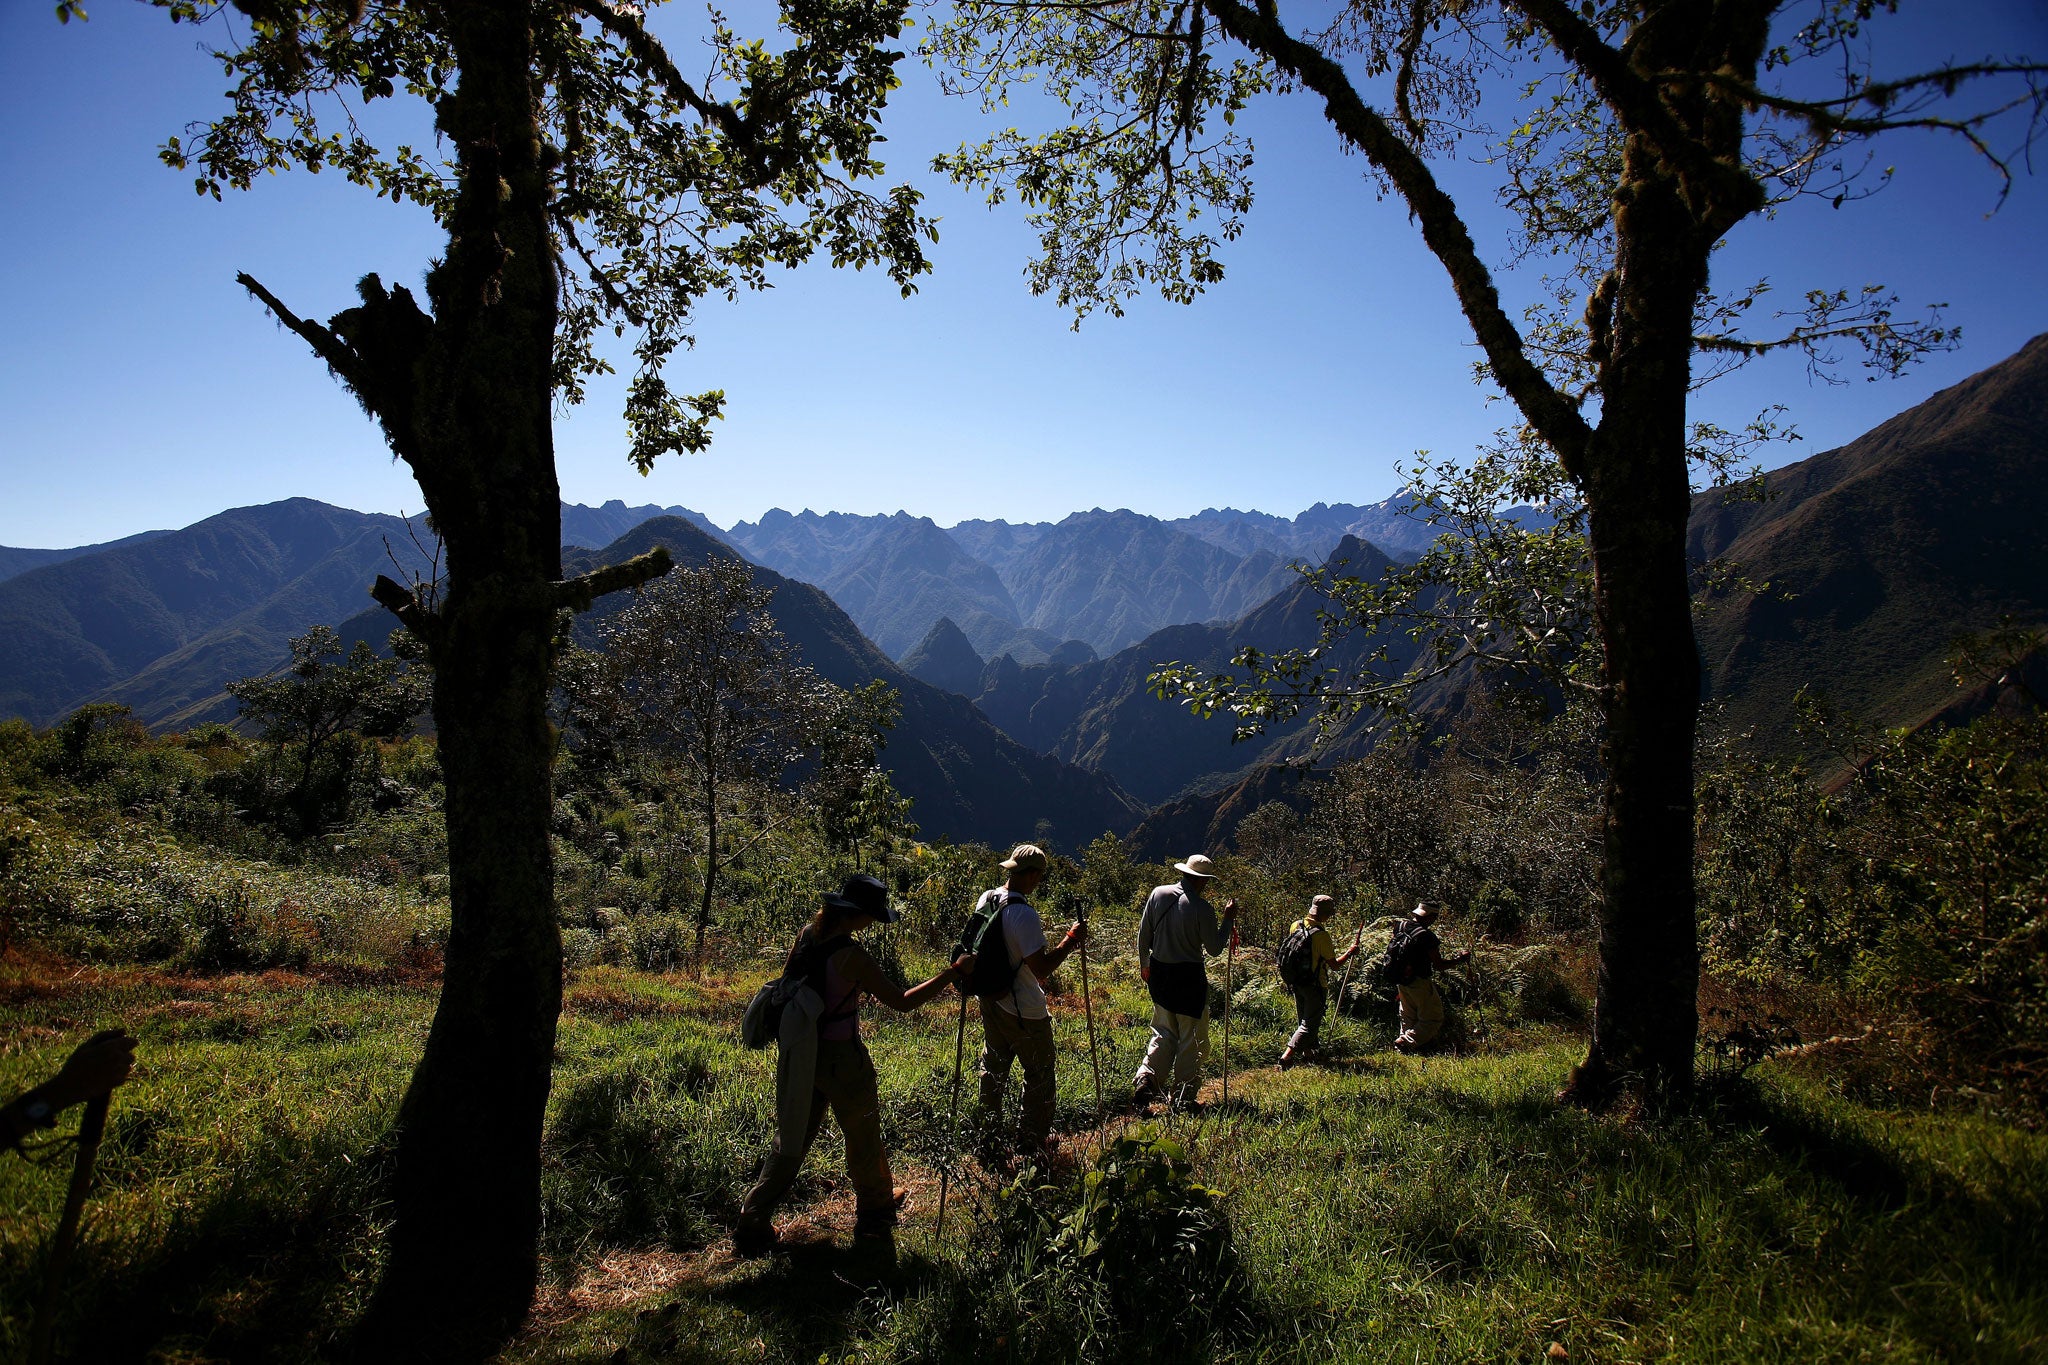 Quest for an idyll: trekkers on their way to Machu Picchu